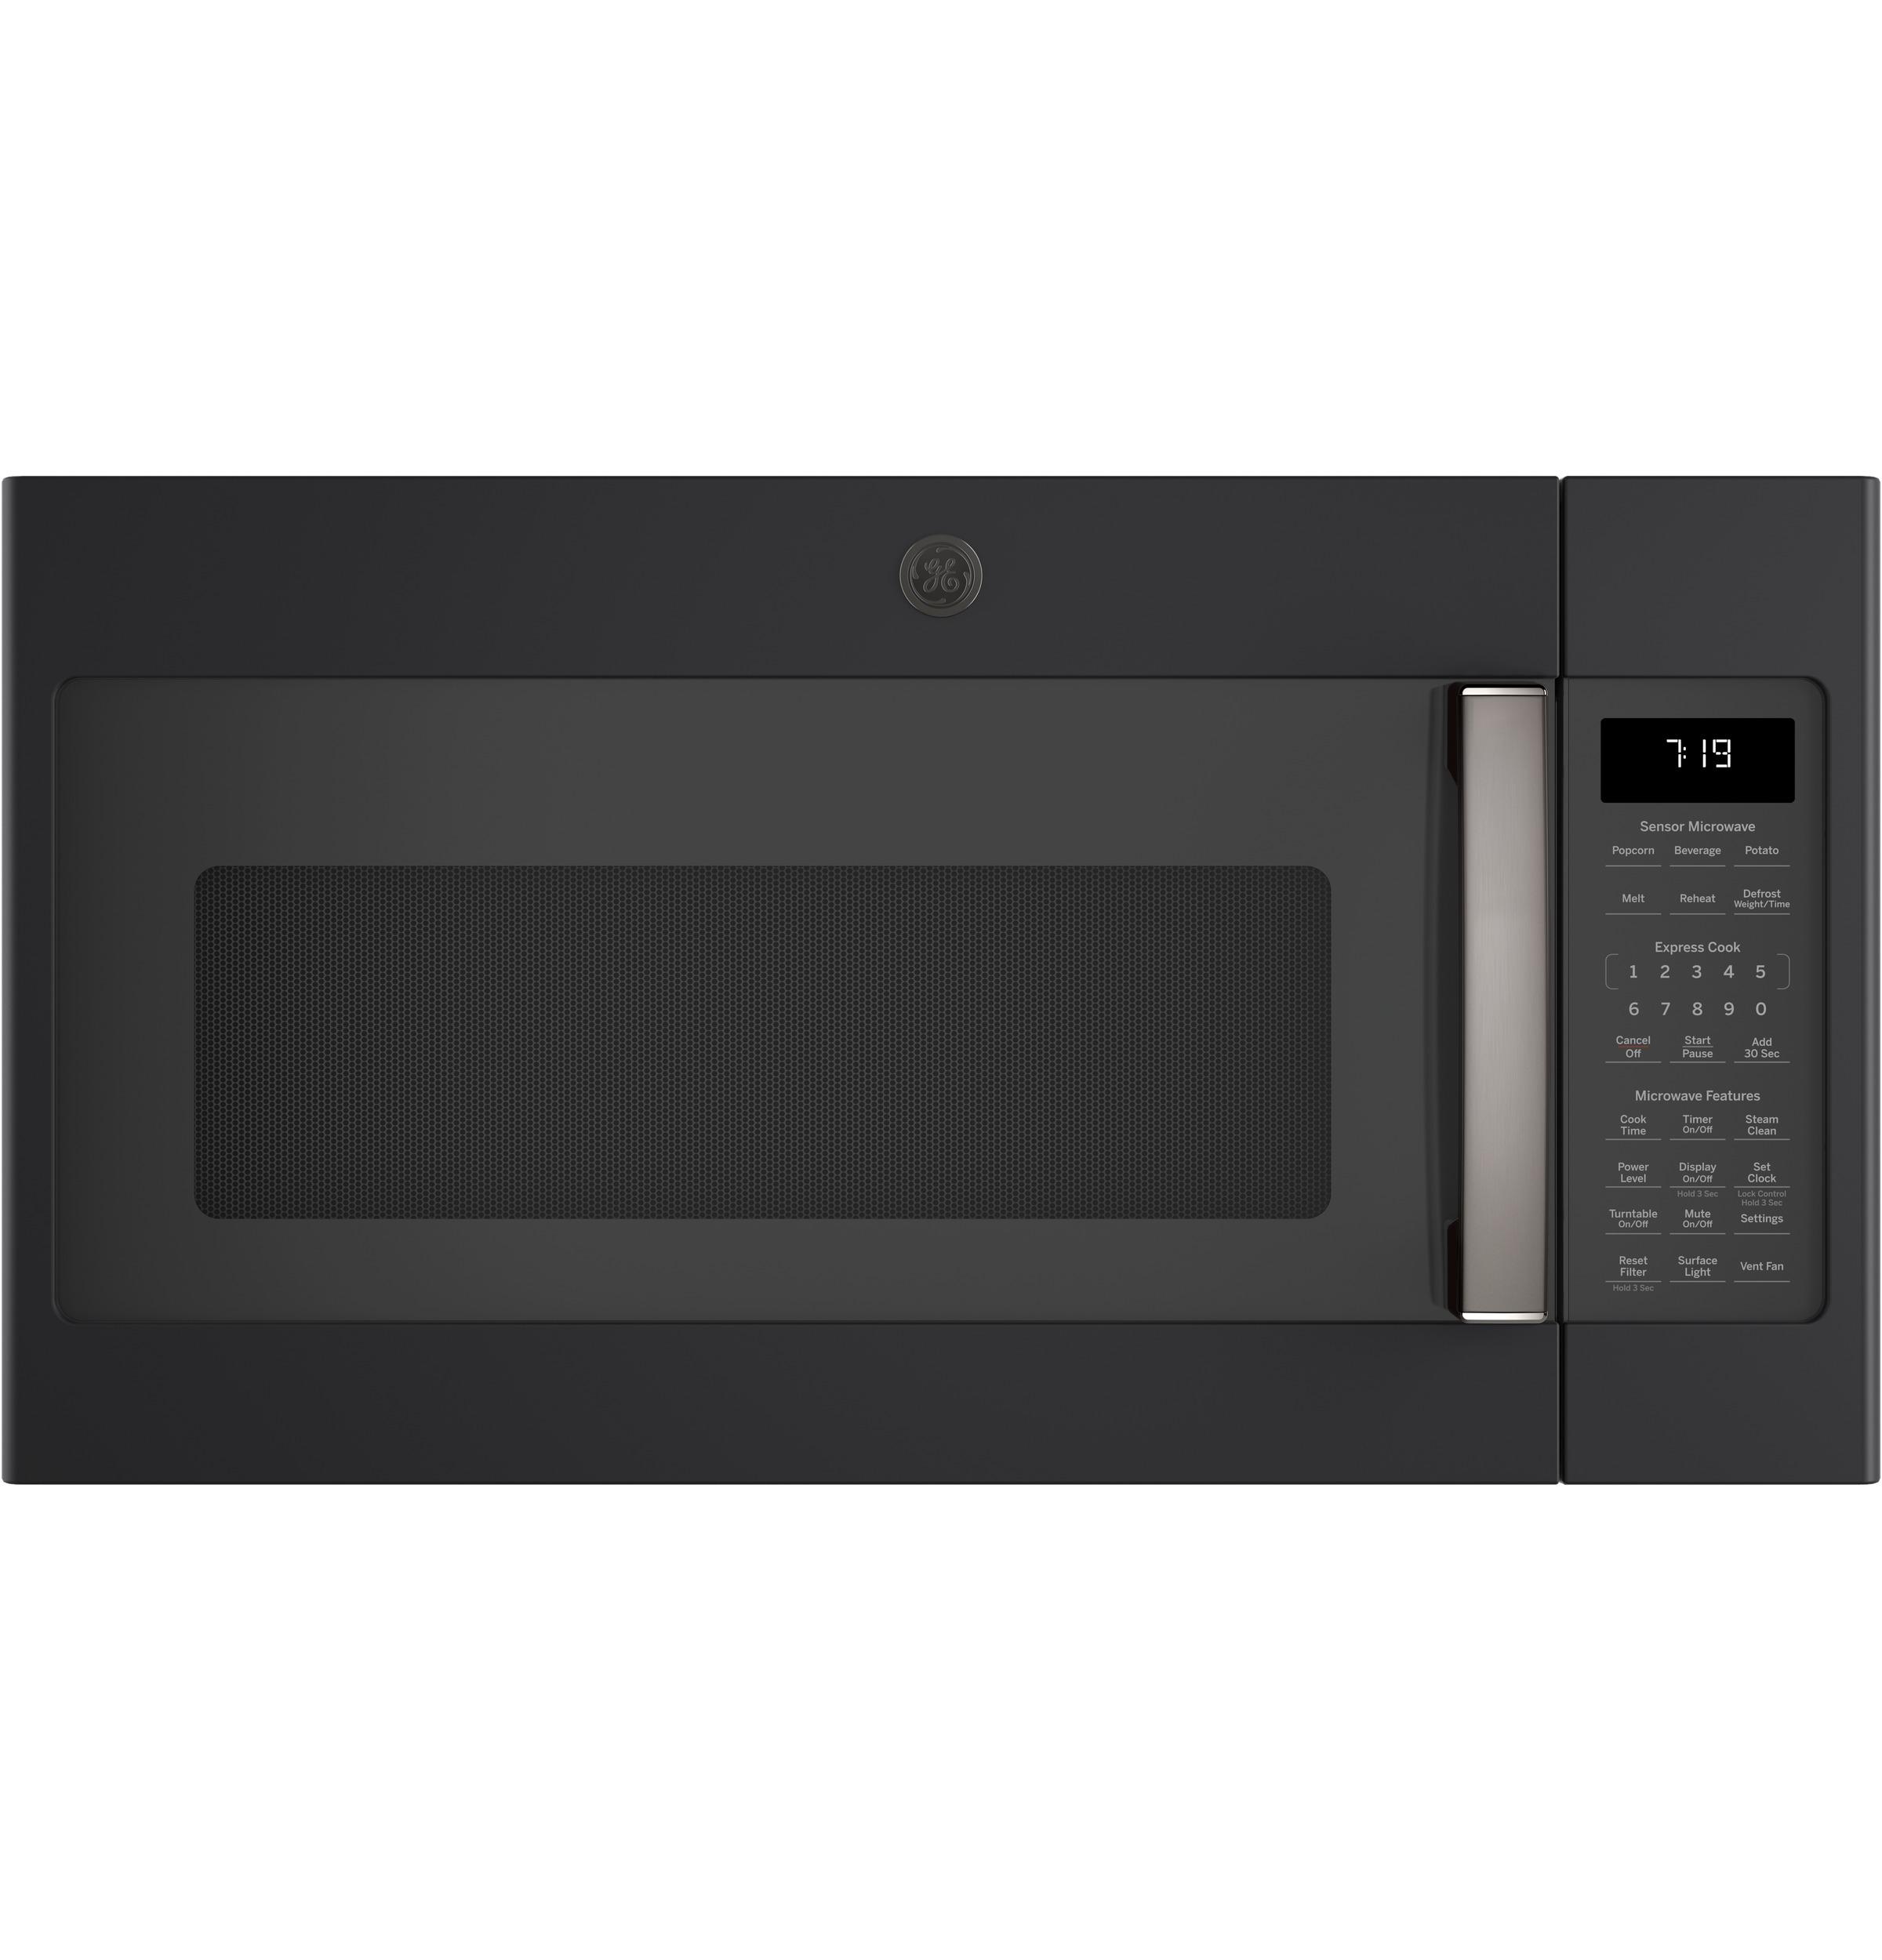 General Electric JNM7196FLDS 30 Inch Over the Range Microwave Oven Black Slate